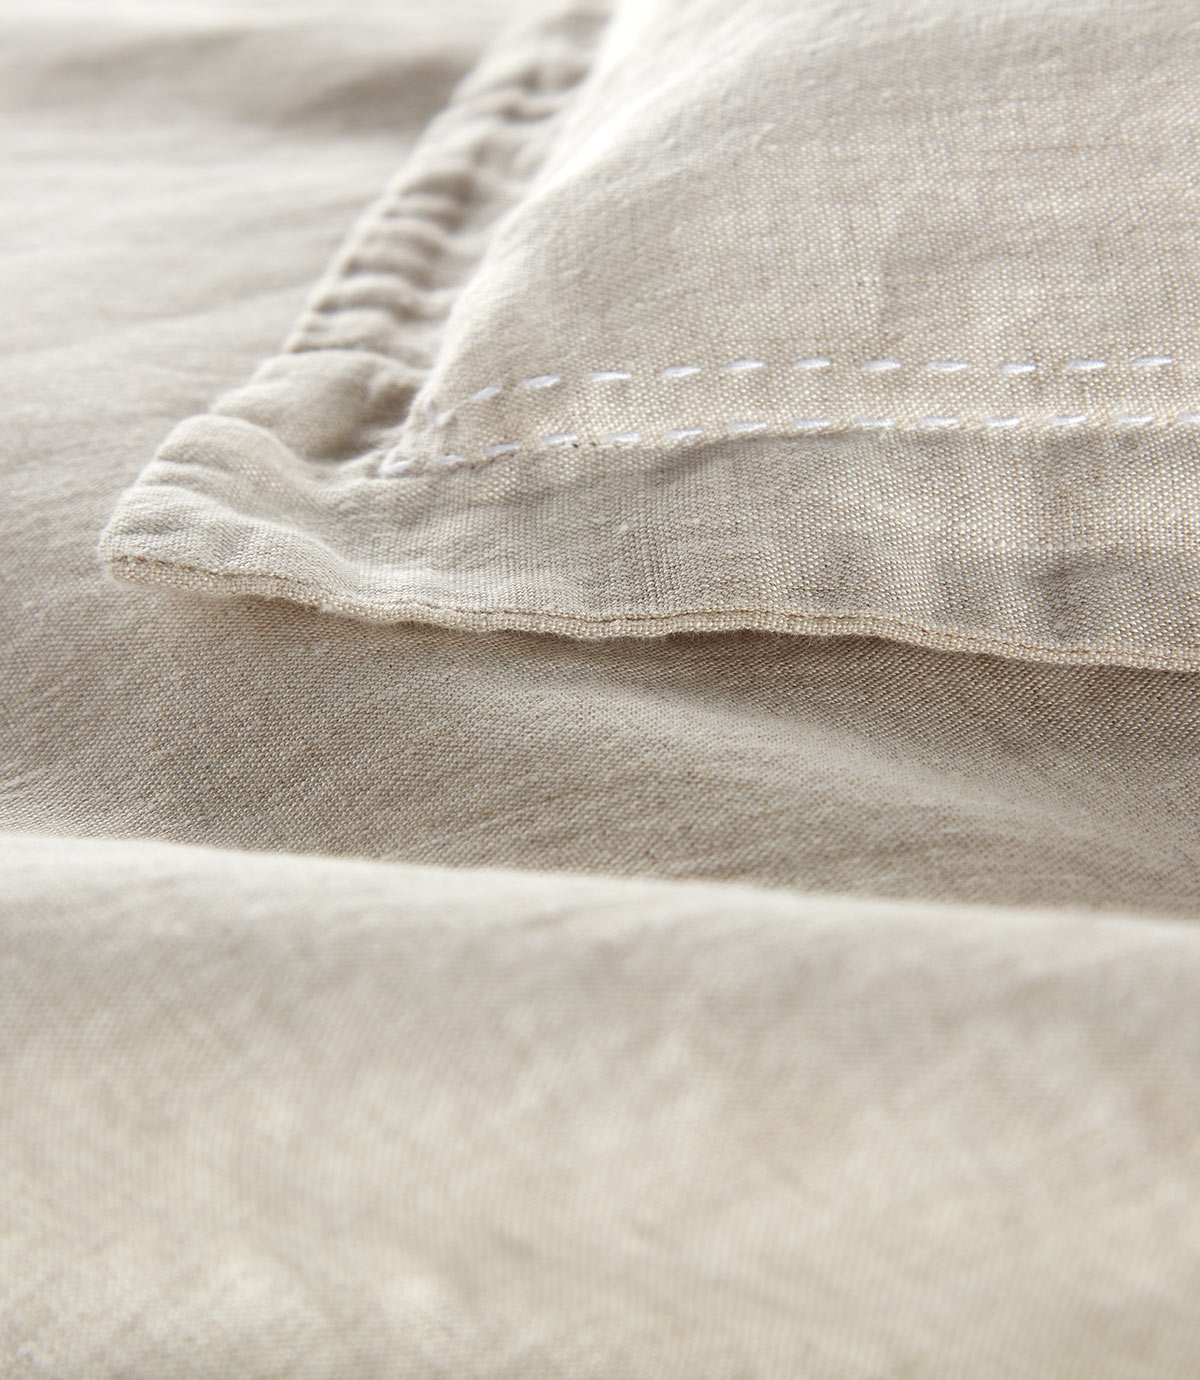 European Washed Linen Duvet Cover stitching detail, Natural